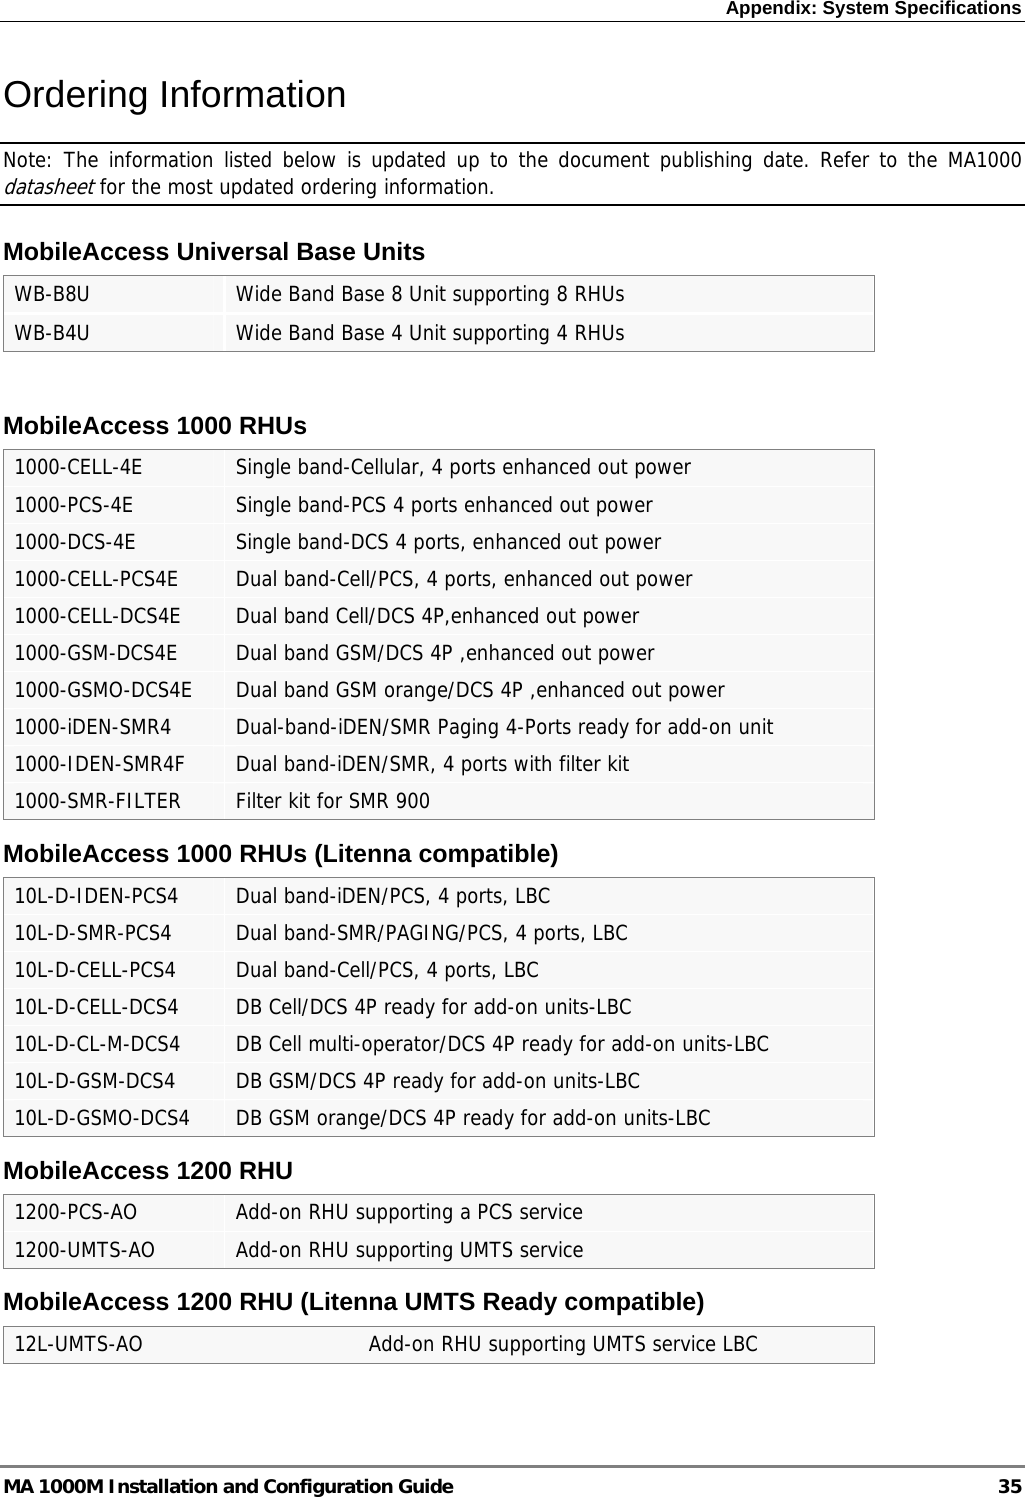 Appendix: System Specifications  Ordering Information Note: The information listed below is updated up to the document publishing date. Refer to the MA1000 datasheet for the most updated ordering information.  MobileAccess Universal Base Units WB-B8U  Wide Band Base 8 Unit supporting 8 RHUs WB-B4U  Wide Band Base 4 Unit supporting 4 RHUs  MobileAccess 1000 RHUs 1000-CELL-4E Single band-Cellular, 4 ports enhanced out power 1000-PCS-4E Single band-PCS 4 ports enhanced out power 1000-DCS-4E Single band-DCS 4 ports, enhanced out power 1000-CELL-PCS4E Dual band-Cell/PCS, 4 ports, enhanced out power 1000-CELL-DCS4E Dual band Cell/DCS 4P,enhanced out power 1000-GSM-DCS4E Dual band GSM/DCS 4P ,enhanced out power 1000-GSMO-DCS4E Dual band GSM orange/DCS 4P ,enhanced out power 1000-iDEN-SMR4  Dual-band-iDEN/SMR Paging 4-Ports ready for add-on unit  1000-IDEN-SMR4F  Dual band-iDEN/SMR, 4 ports with filter kit 1000-SMR-FILTER  Filter kit for SMR 900 MobileAccess 1000 RHUs (Litenna compatible) 10L-D-IDEN-PCS4  Dual band-iDEN/PCS, 4 ports, LBC 10L-D-SMR-PCS4  Dual band-SMR/PAGING/PCS, 4 ports, LBC 10L-D-CELL-PCS4  Dual band-Cell/PCS, 4 ports, LBC 10L-D-CELL-DCS4  DB Cell/DCS 4P ready for add-on units-LBC 10L-D-CL-M-DCS4  DB Cell multi-operator/DCS 4P ready for add-on units-LBC 10L-D-GSM-DCS4  DB GSM/DCS 4P ready for add-on units-LBC 10L-D-GSMO-DCS4  DB GSM orange/DCS 4P ready for add-on units-LBC MobileAccess 1200 RHU 1200-PCS-AO  Add-on RHU supporting a PCS service 1200-UMTS-AO  Add-on RHU supporting UMTS service MobileAccess 1200 RHU (Litenna UMTS Ready compatible) 12L-UMTS-AO    Add-on RHU supporting UMTS service LBC  MA 1000M Installation and Configuration Guide  35 